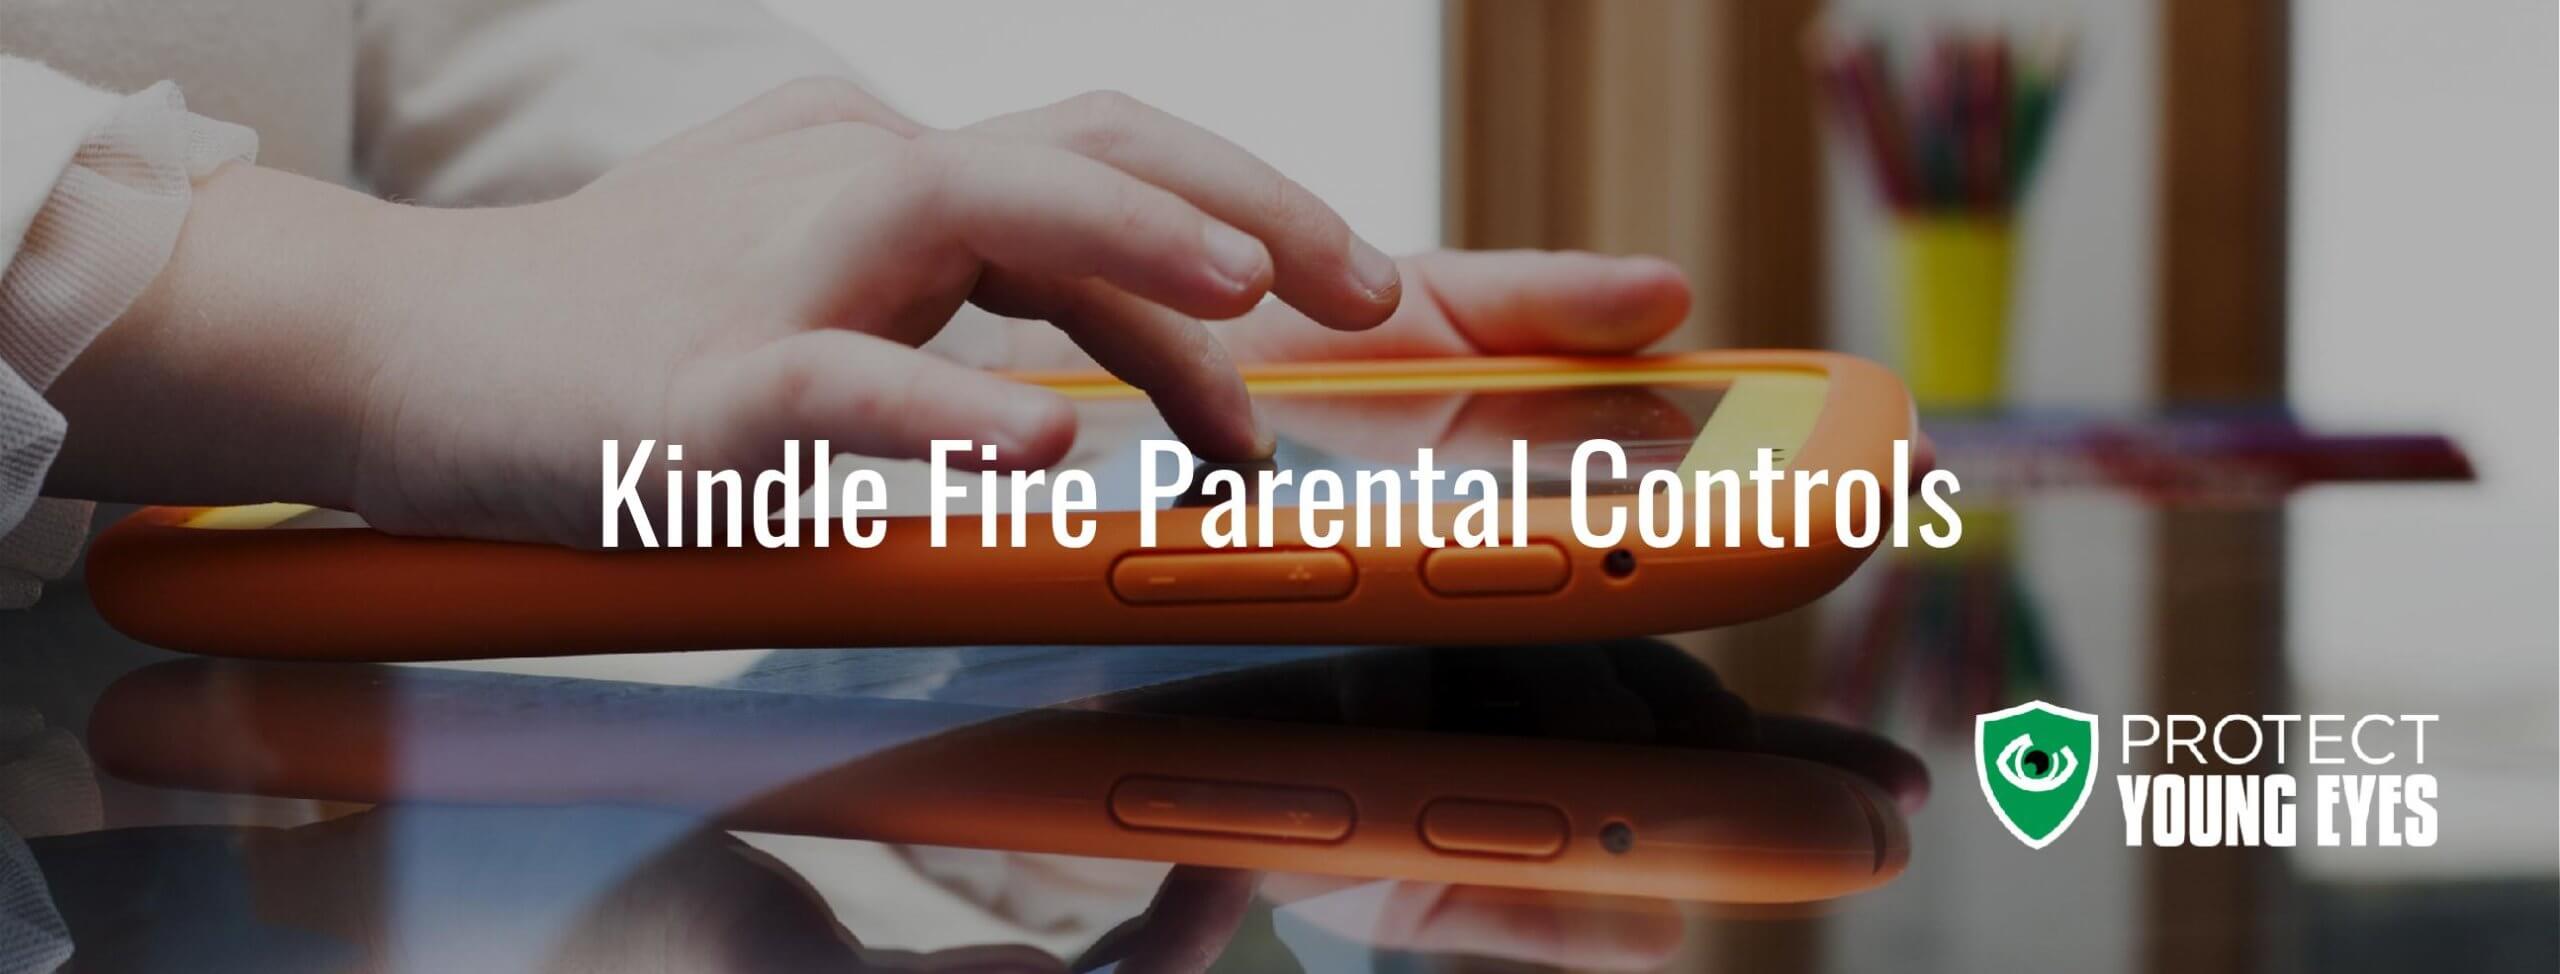 Kindle Fire Parental Controls Complete Guide From Protect Young Eyes